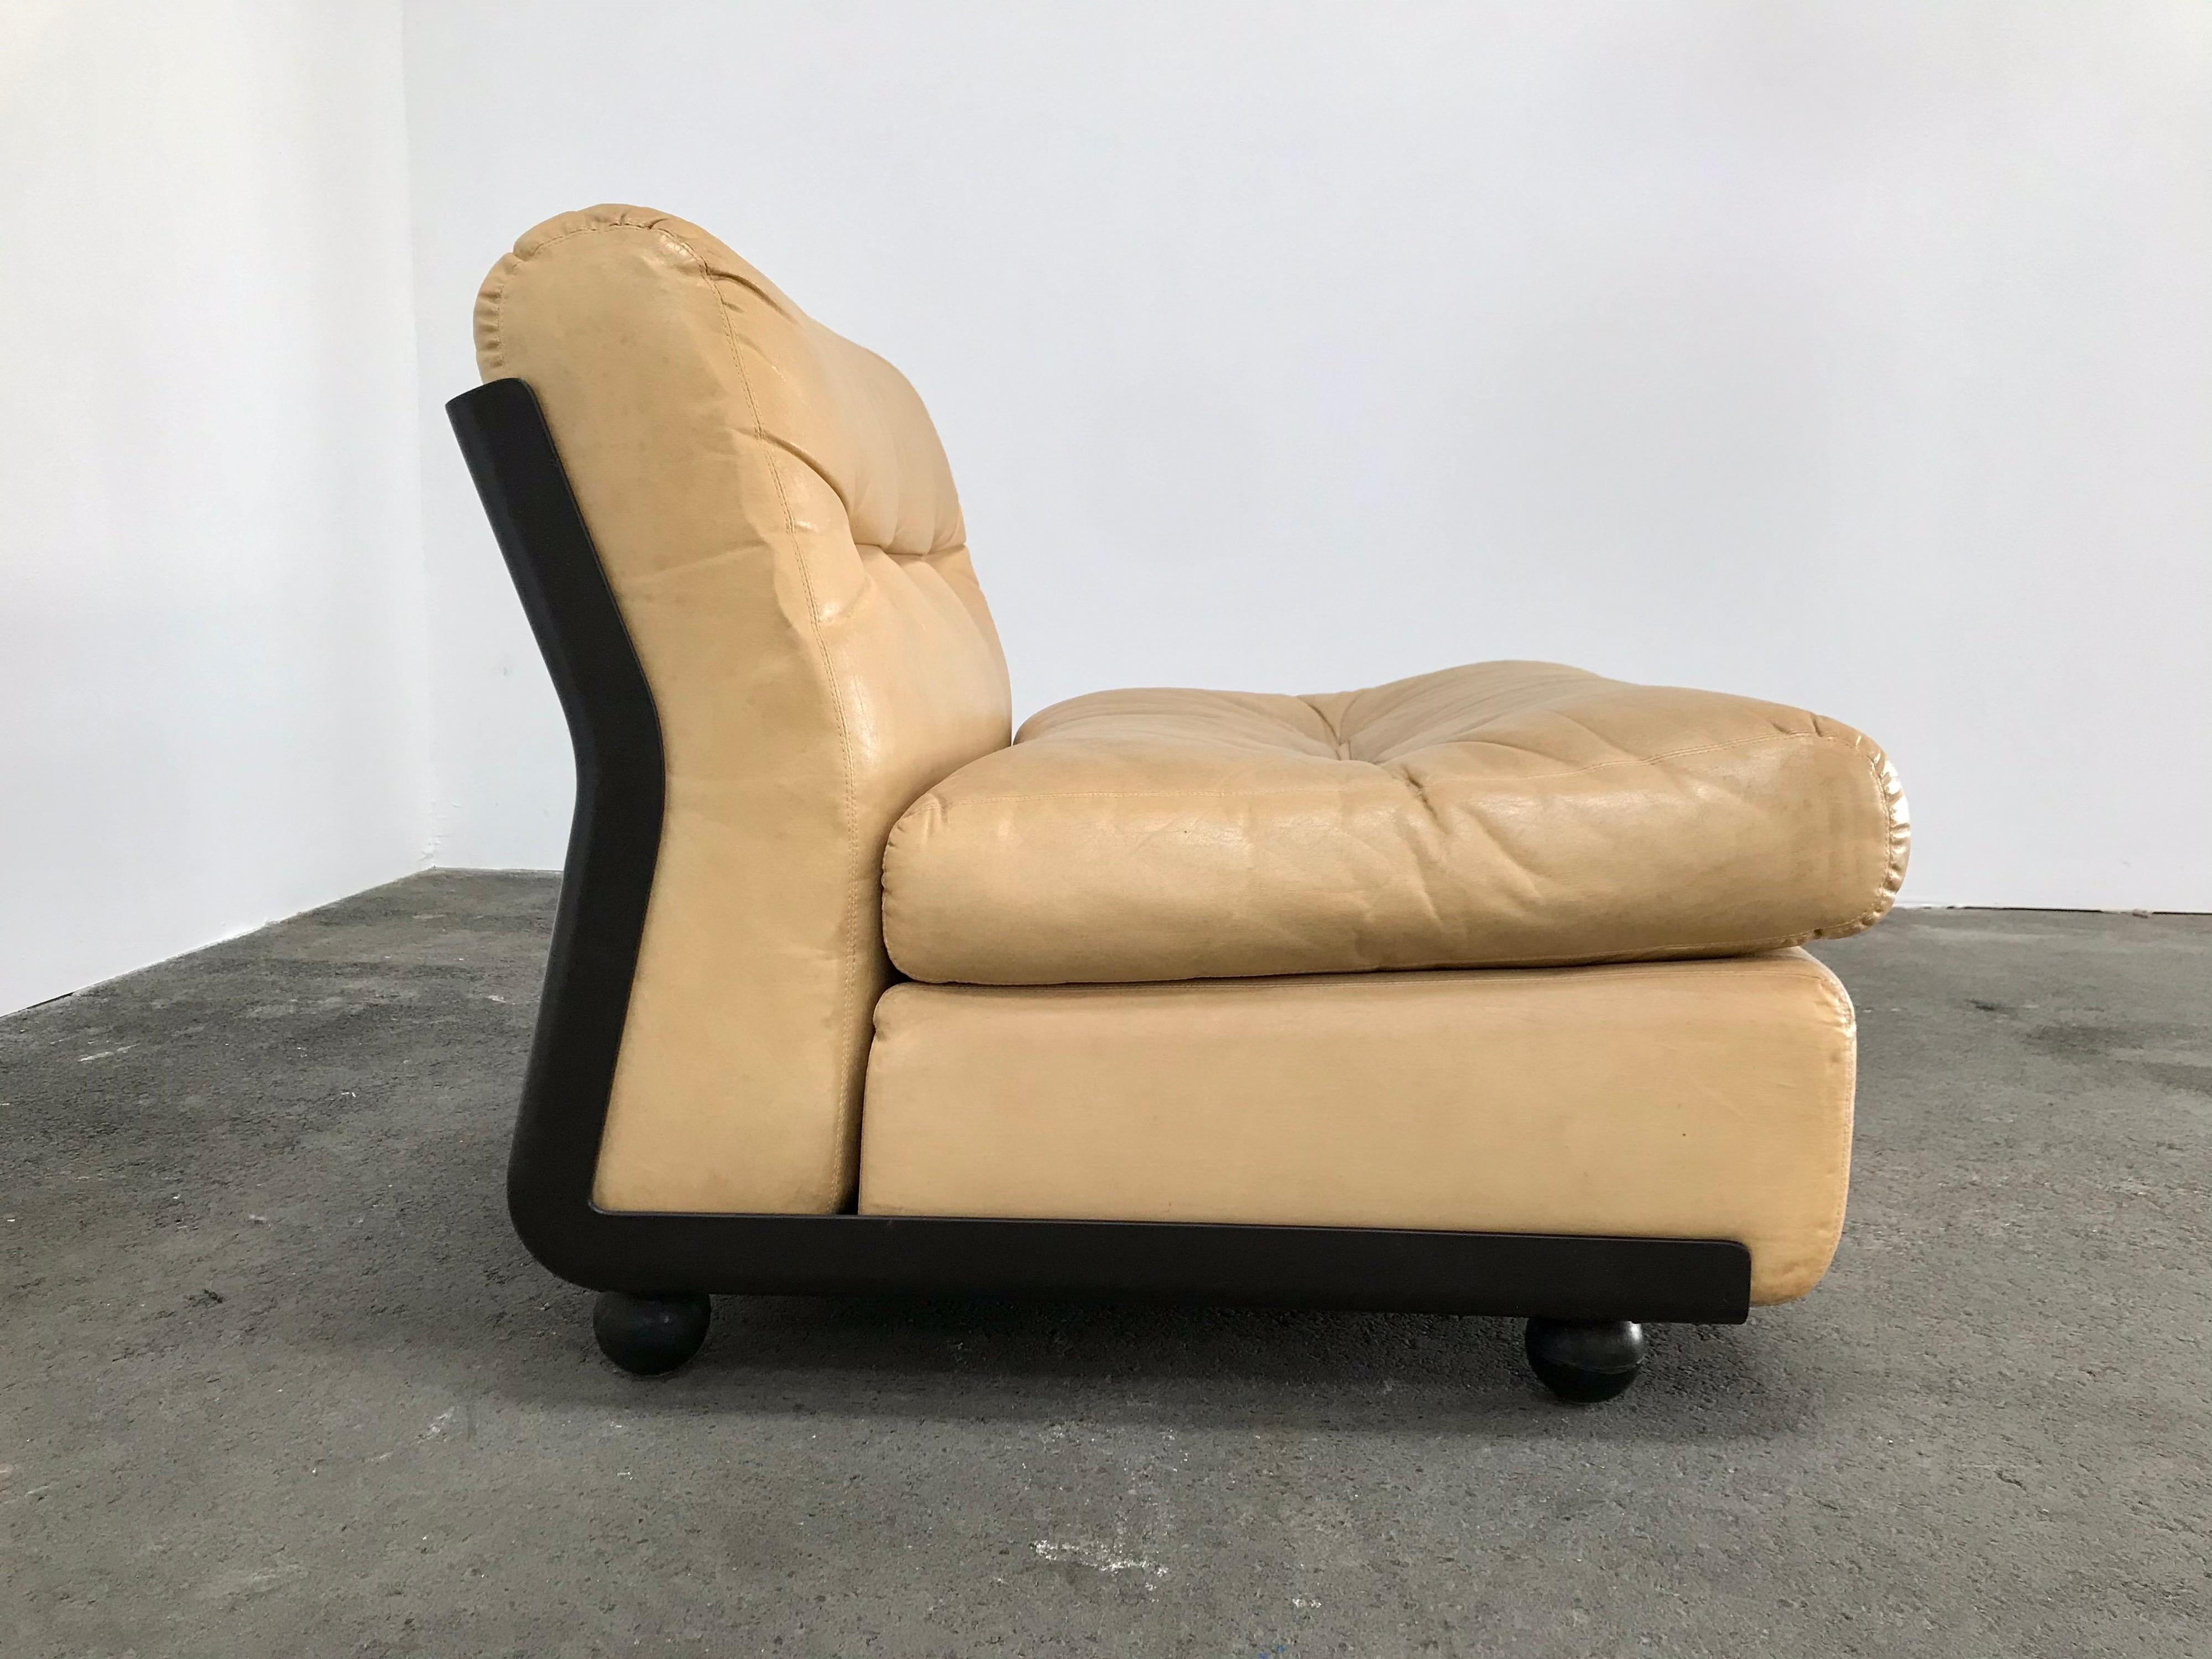 12 iconic Amanta lounges by Mario Bellini for B&B Italia. Brown fiberglass shell houses seating with fill in good condition. Reupholster to suit your large project. An additional 6 are available from the same vintage in a particular fabric, as